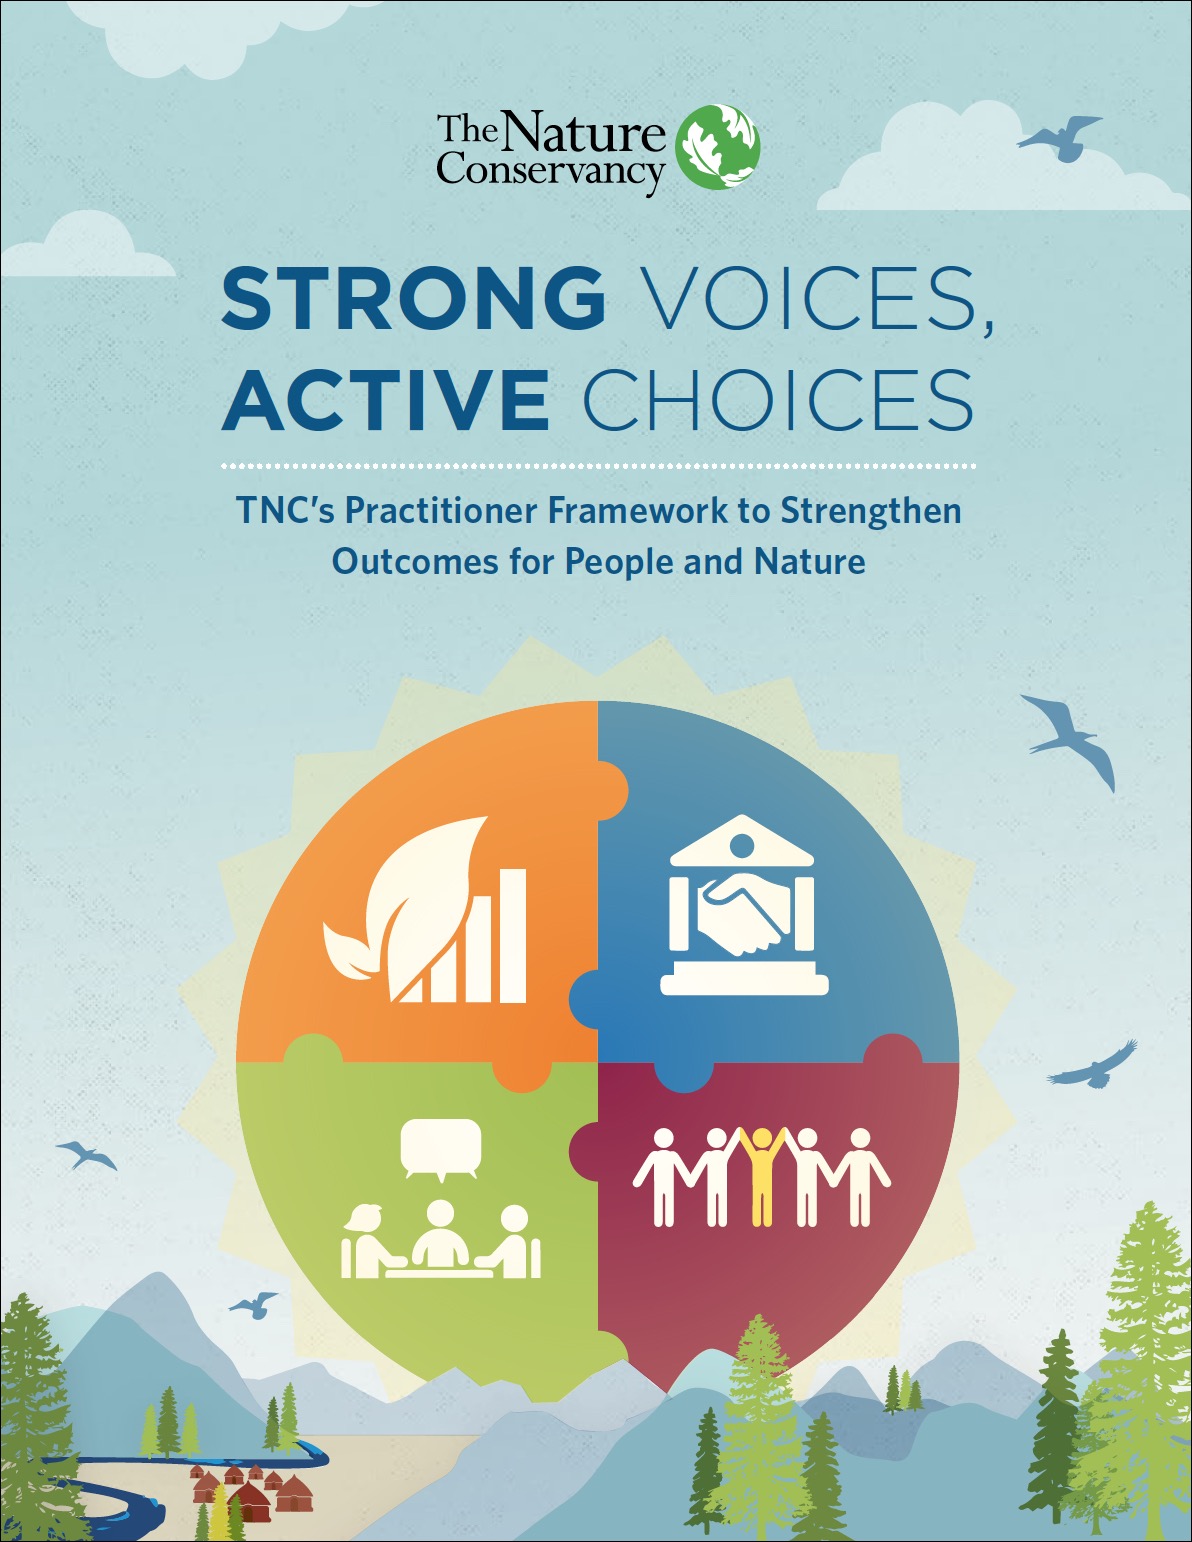 TNC's practitioner framework to strengthen outcomes for people and nature.